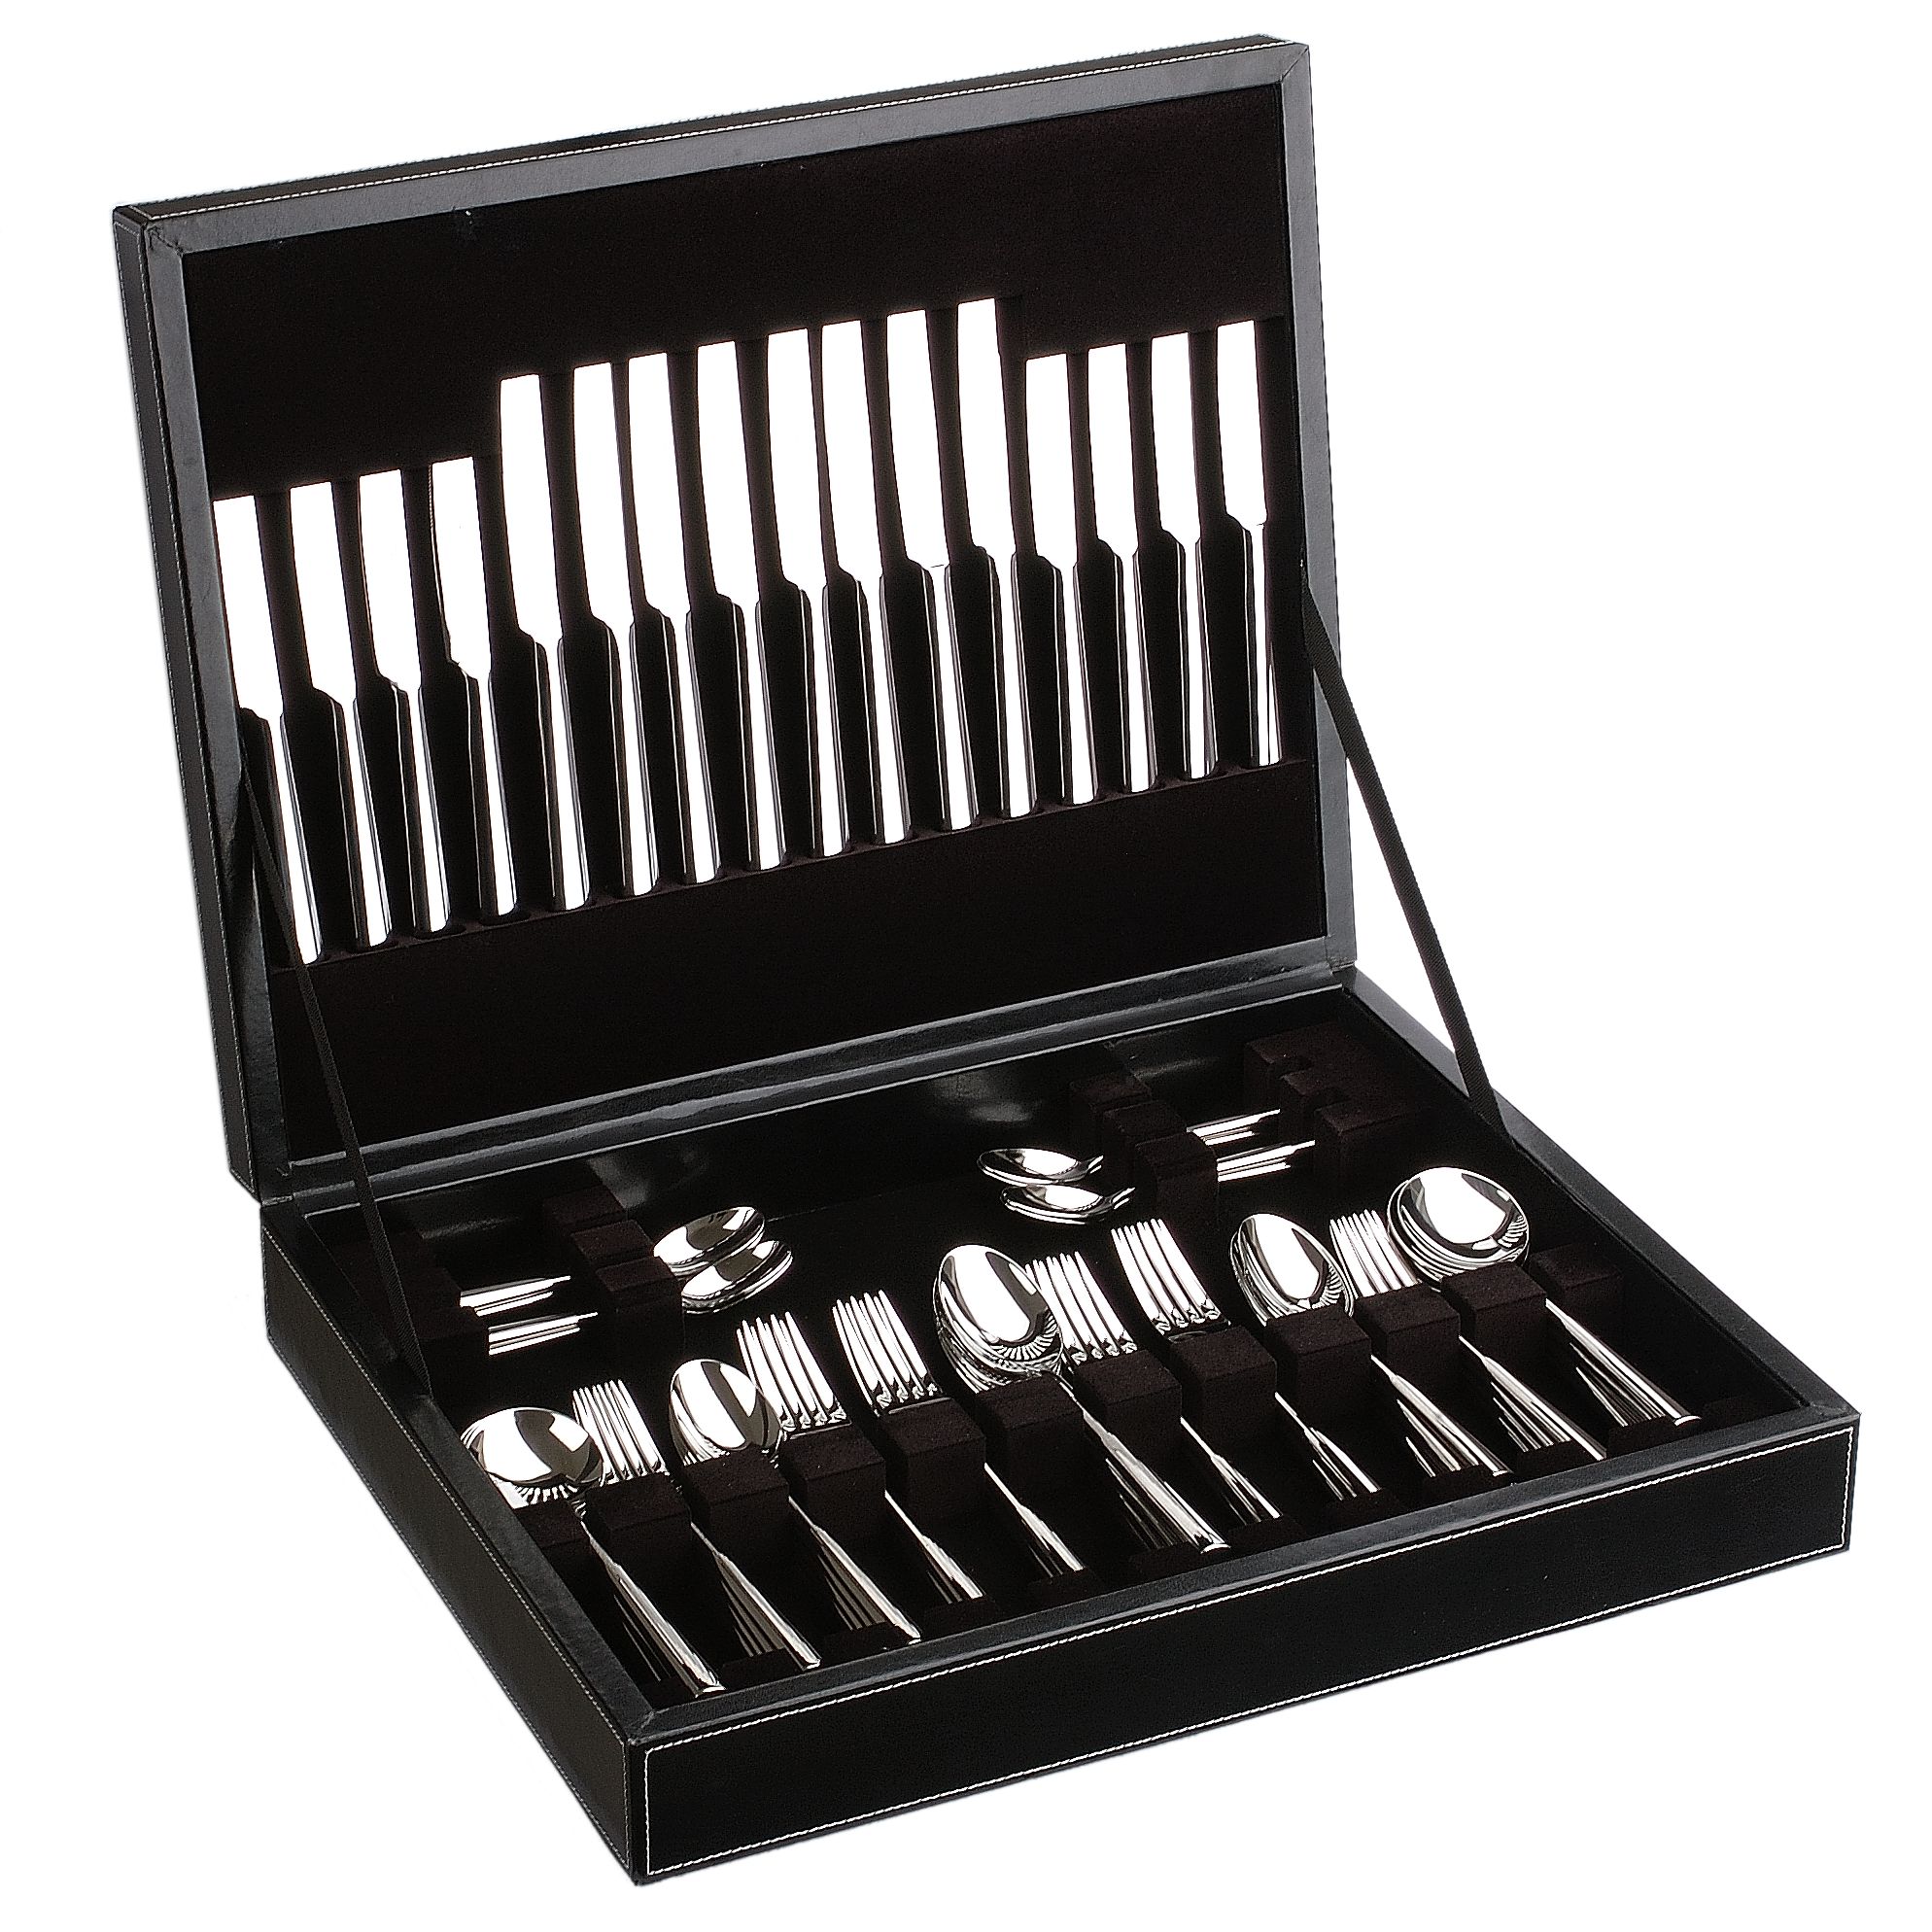 Ovation Canteen, Stainless Steel, 60-Piece